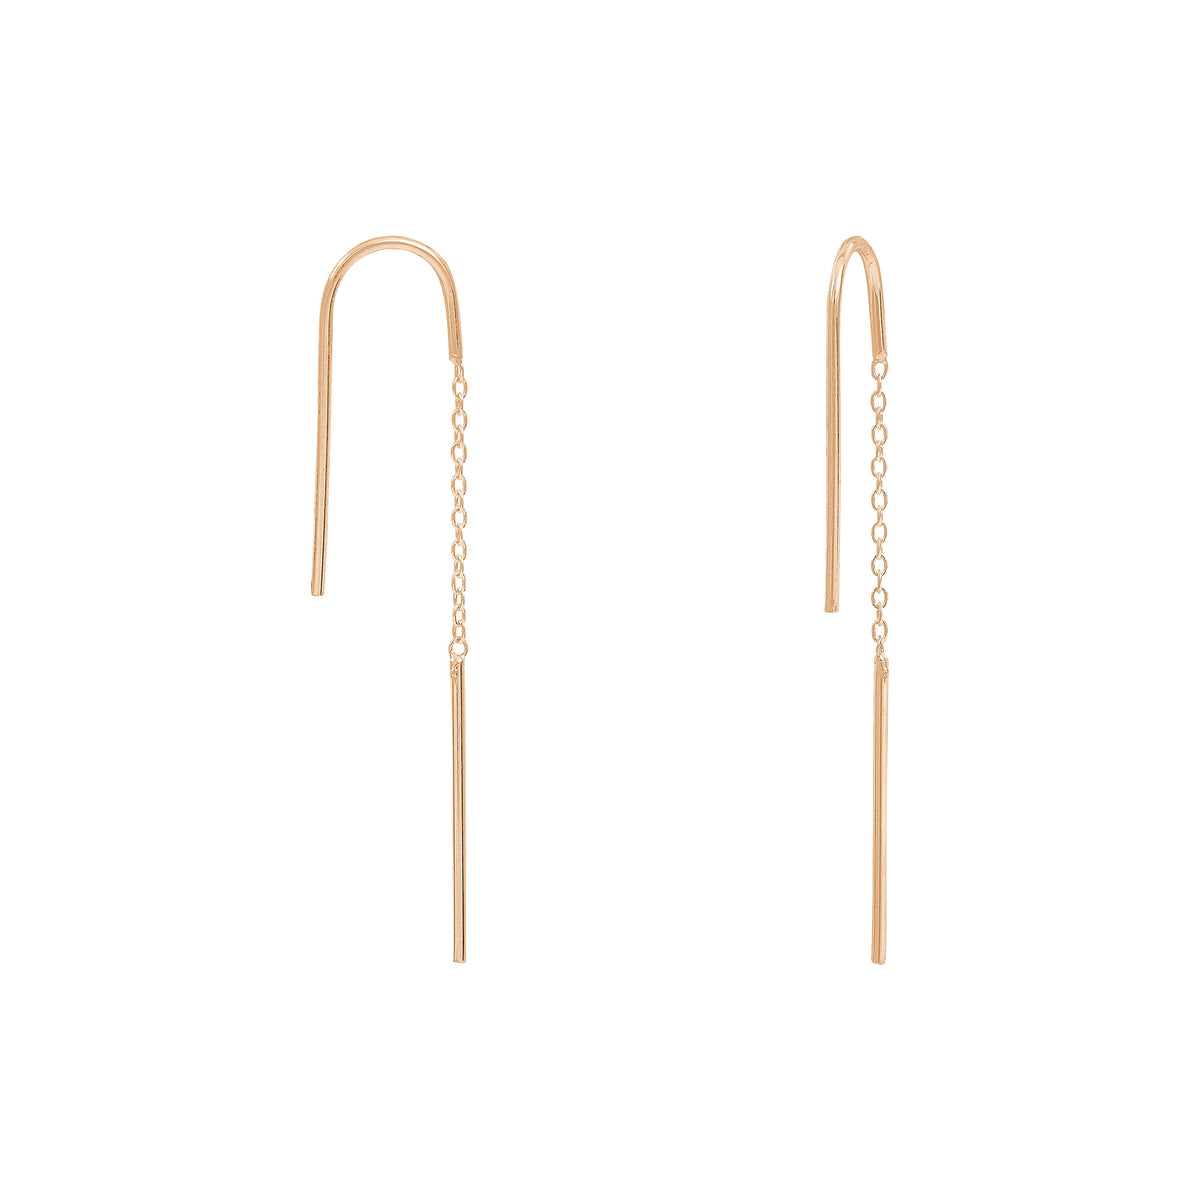 The Gold Plated Silver Daphné Earrings